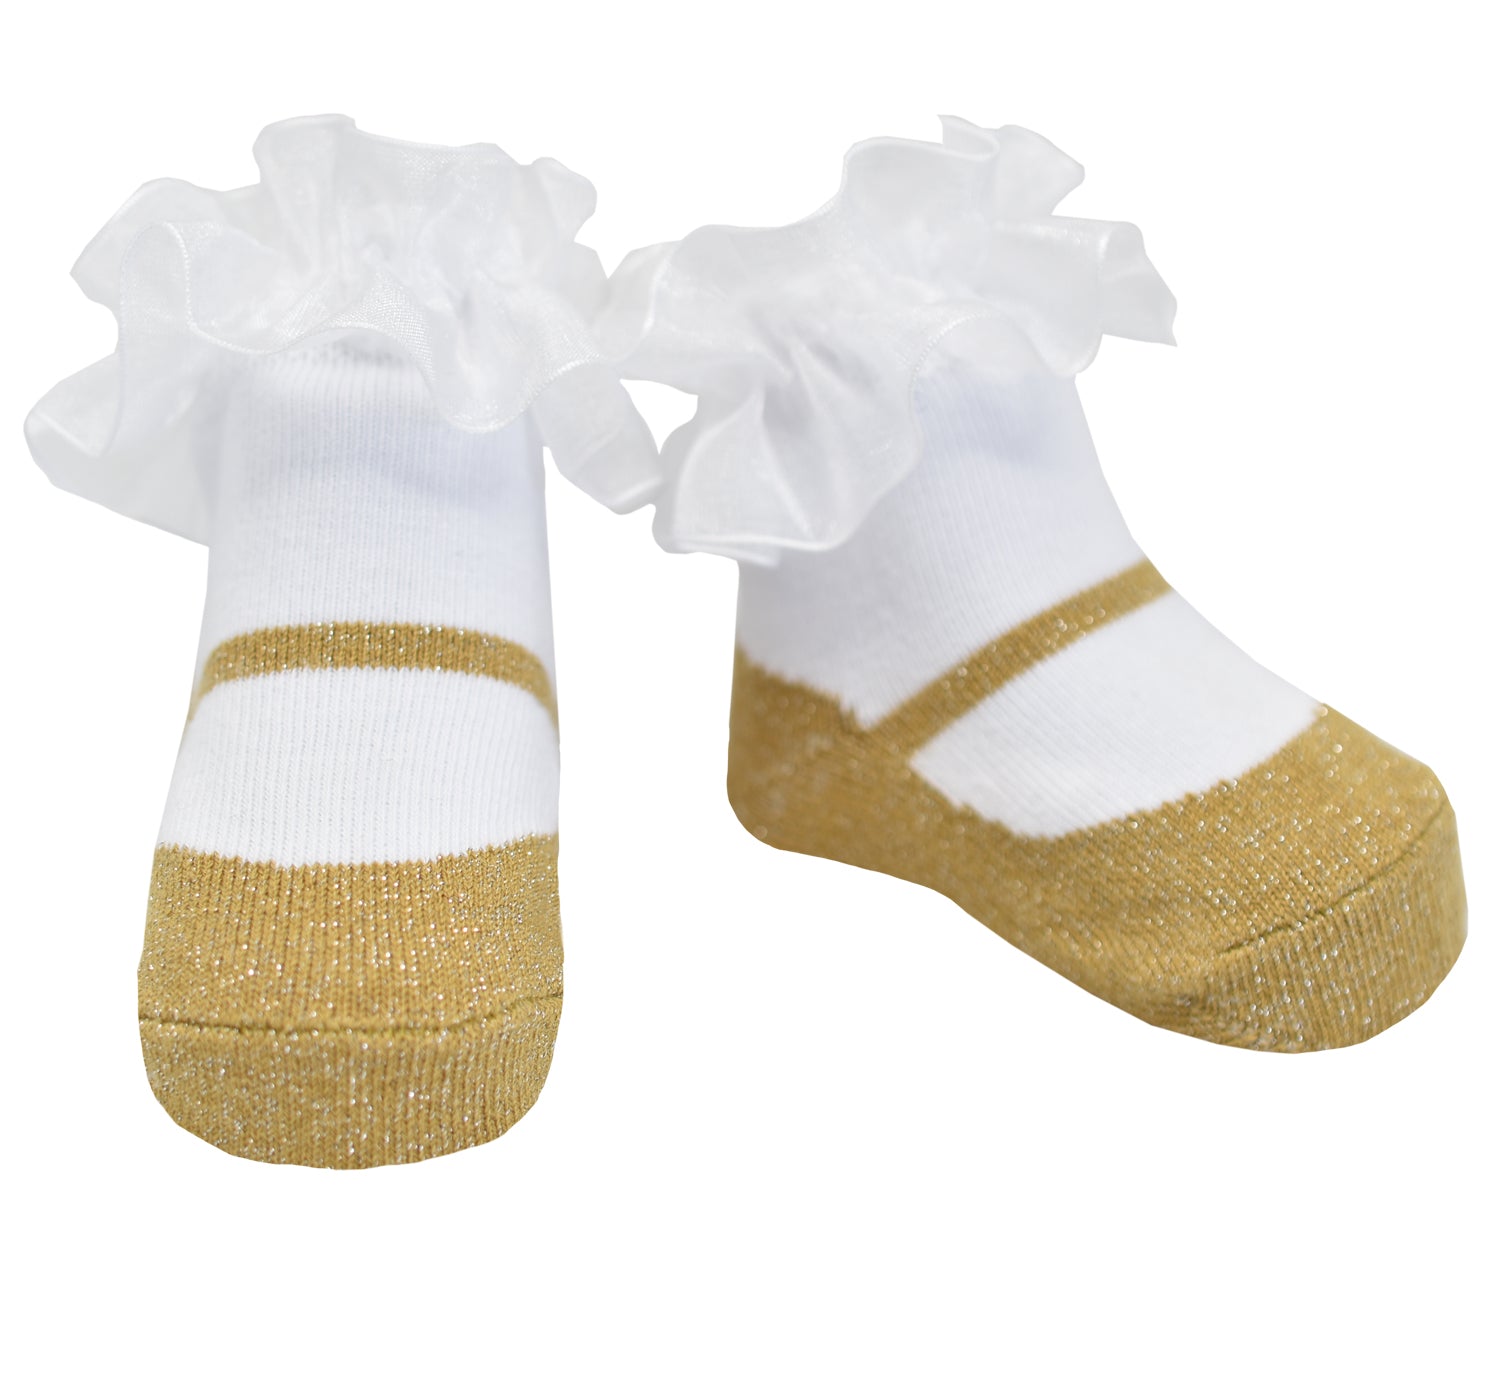 Gold metallic sparkle socks with ruffle for Christmas christening or special occasion dress baby girl